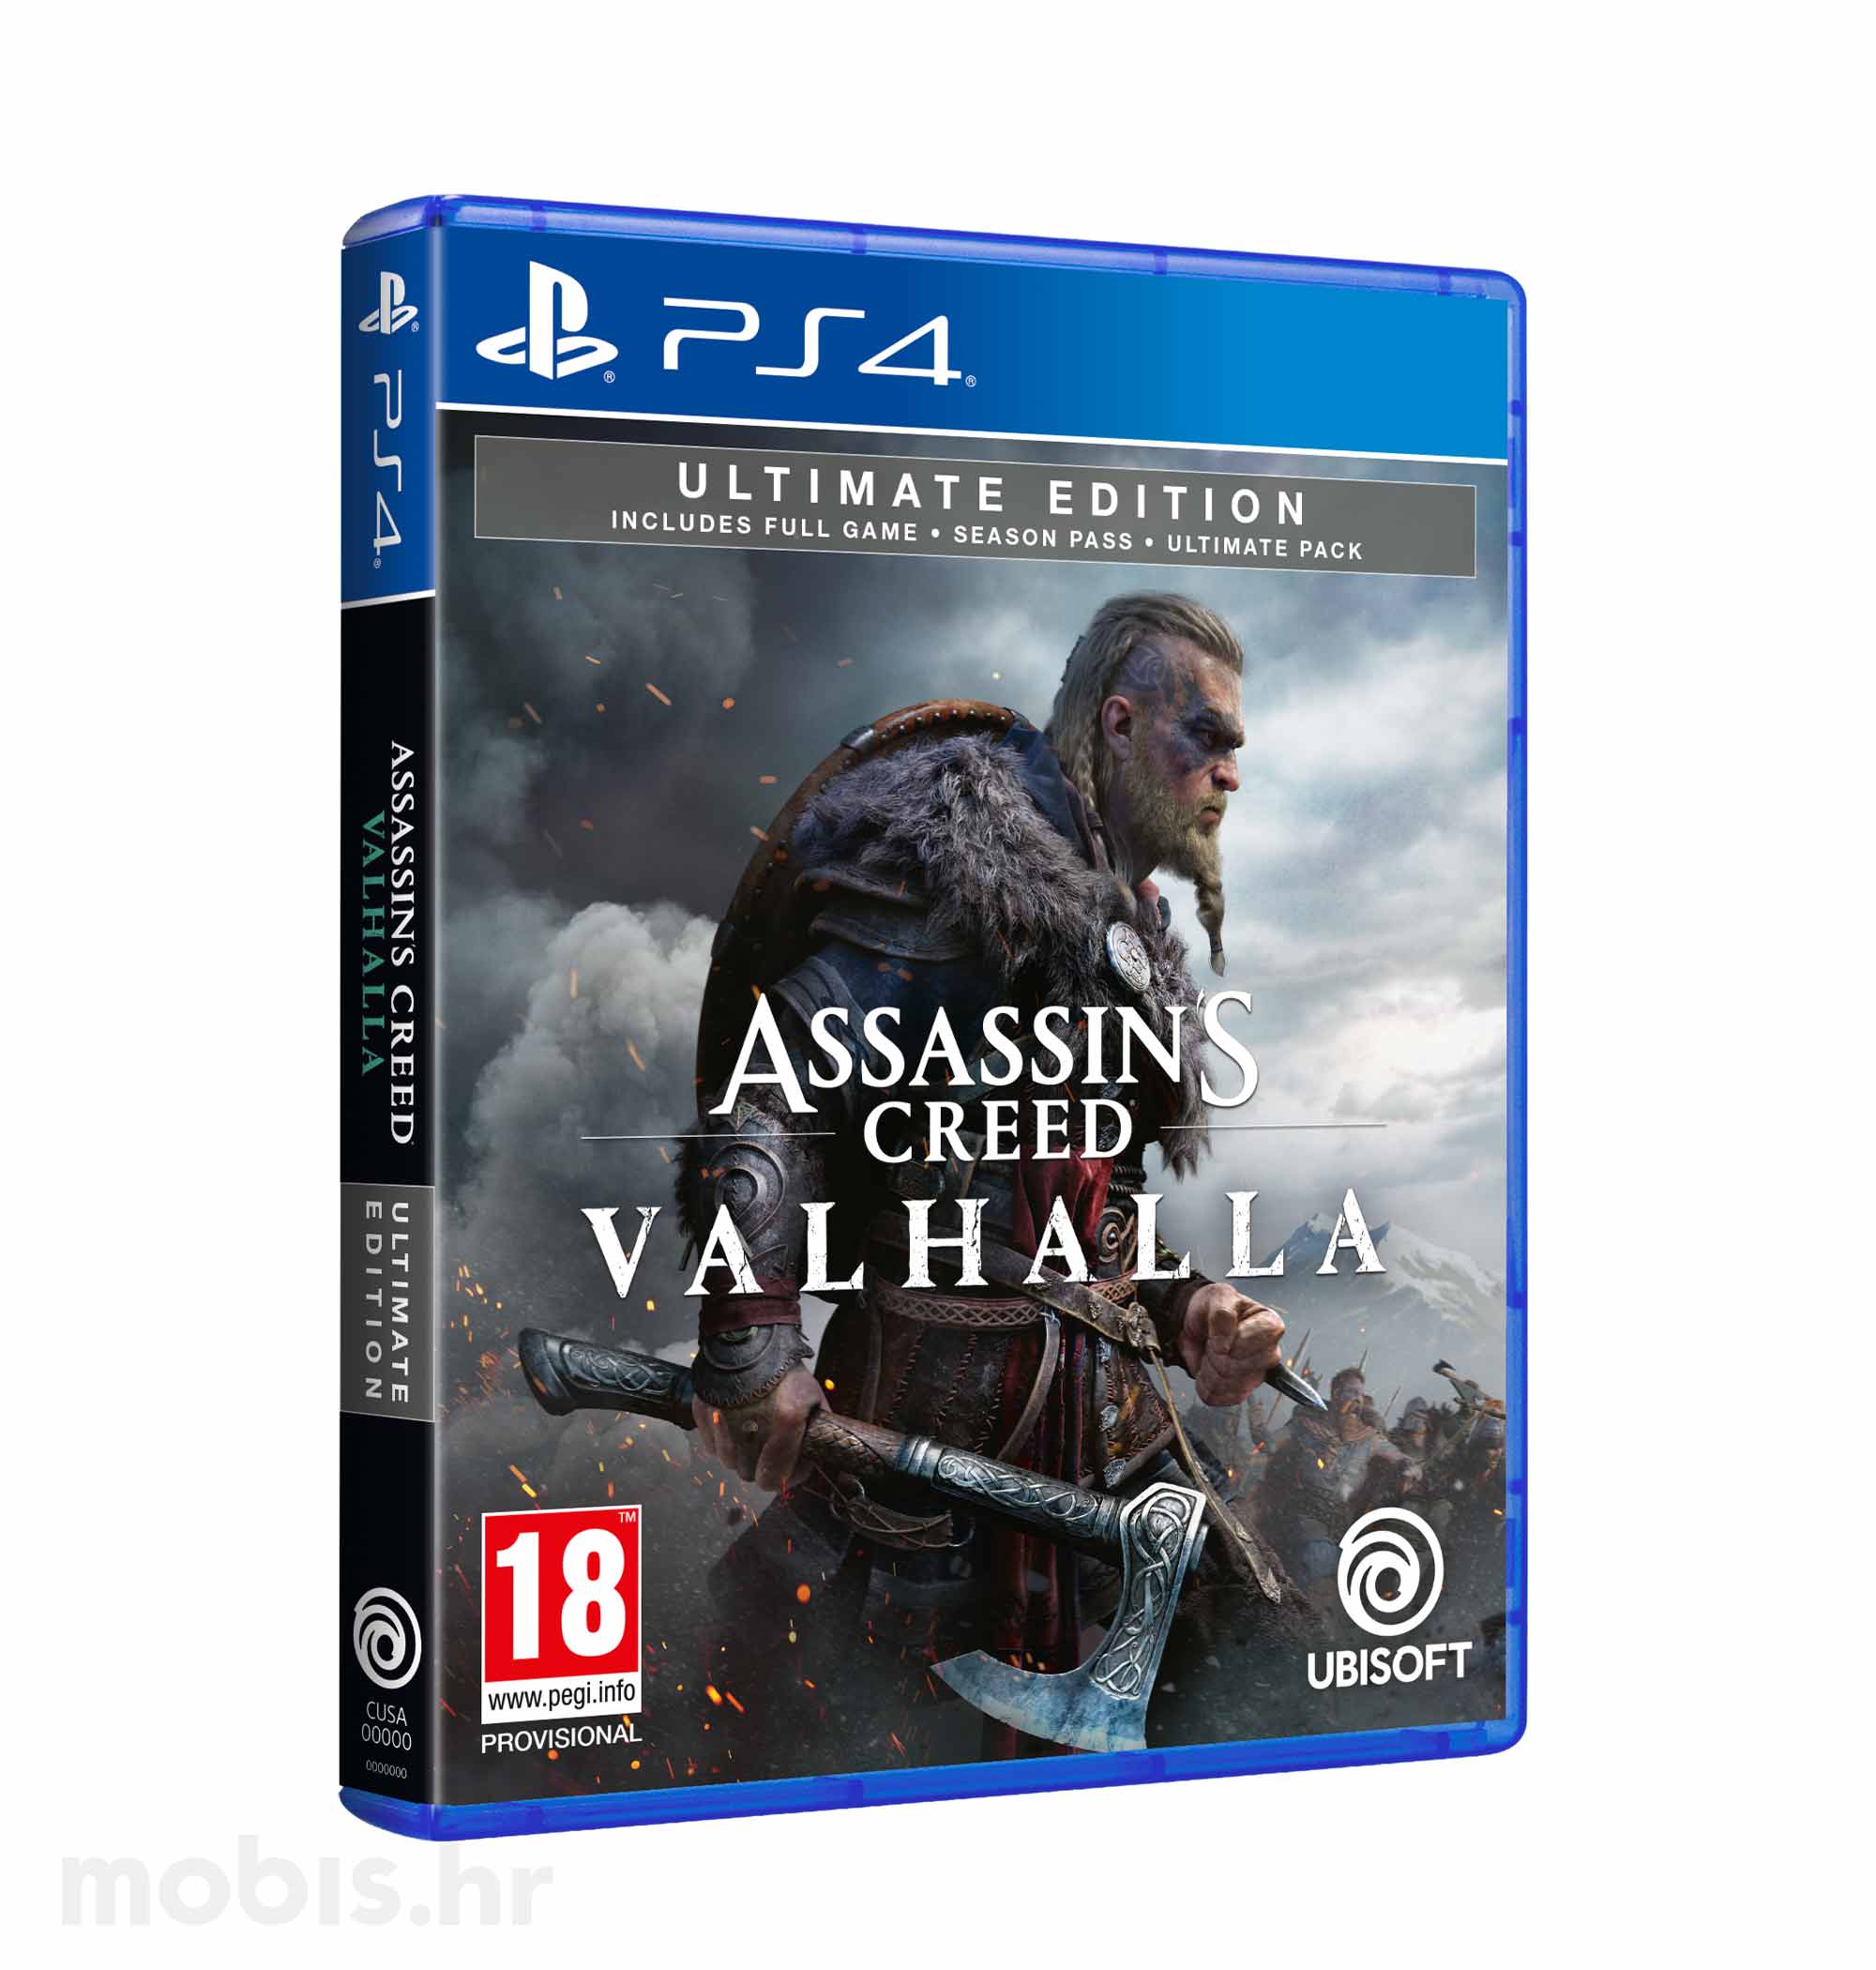 Creed игра ps4. Assassin's Creed Вальгалла ps4. Ассасин Крид диск на ПС 4. Assassin's Creed Вальгалла диск ПС 4. Ассасин Крид Вальхалла ps4.